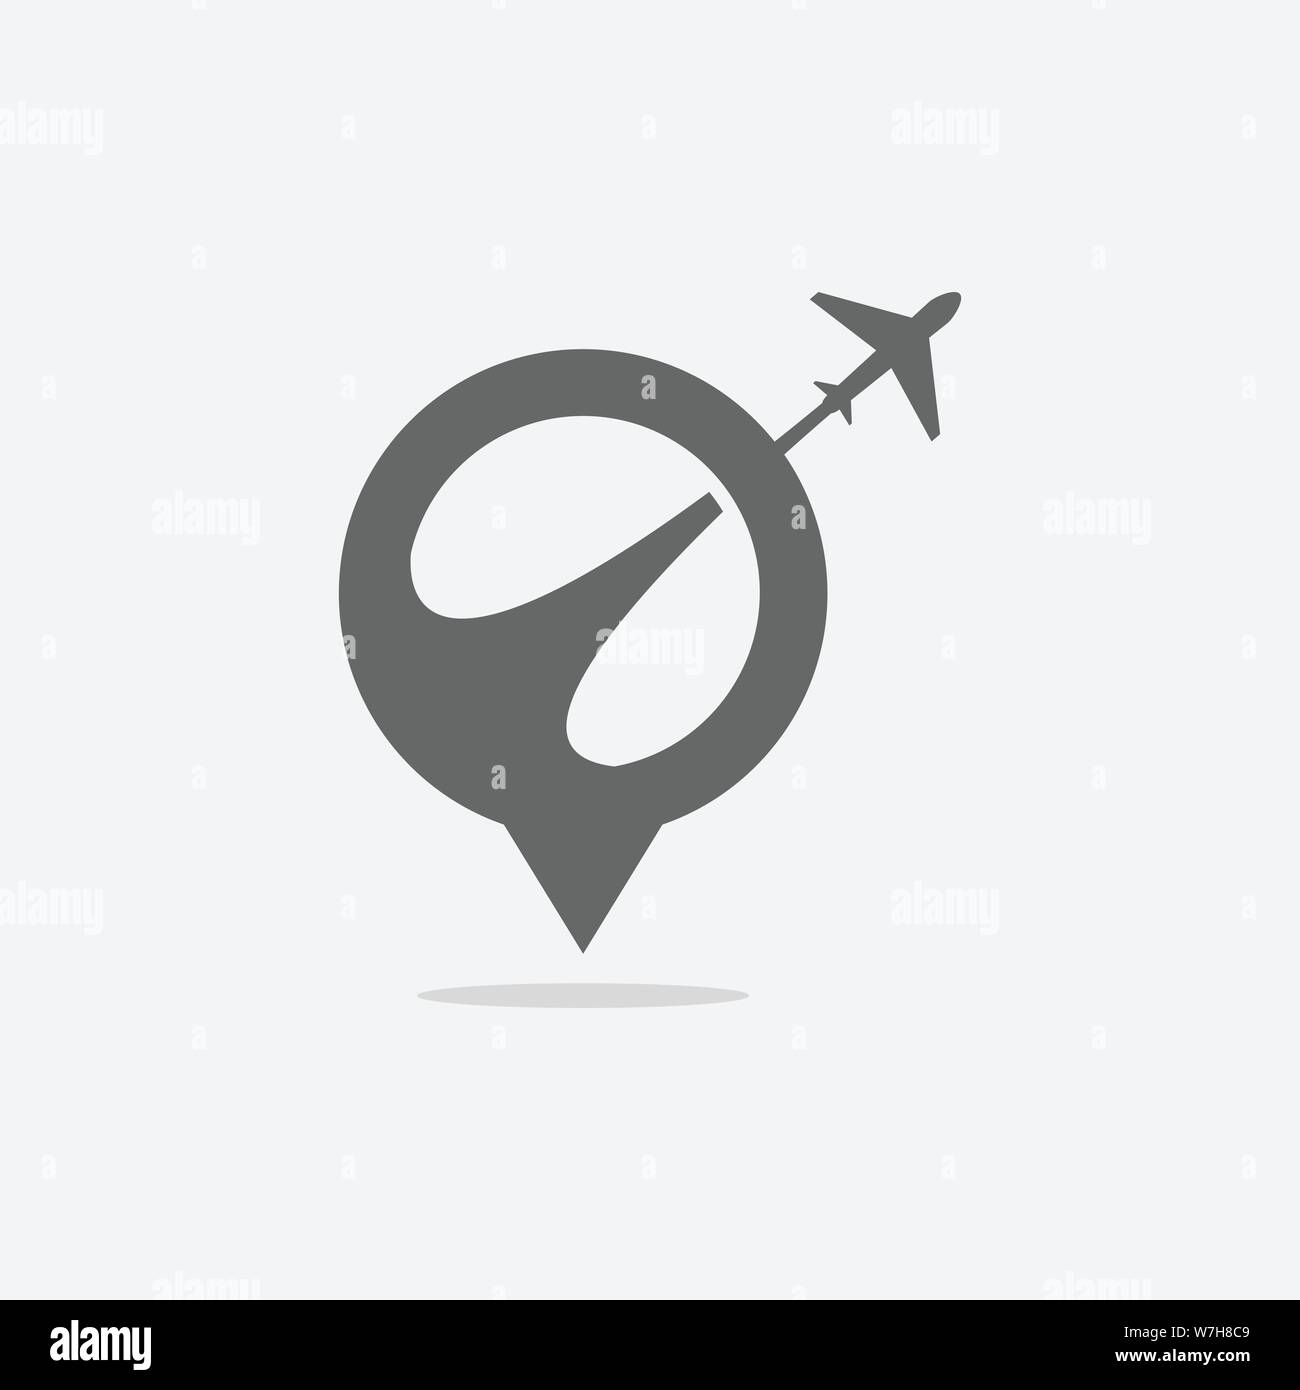 Travel agency logo with GPS map pointer icon and airplane travel logo vector design illustration Stock Vector